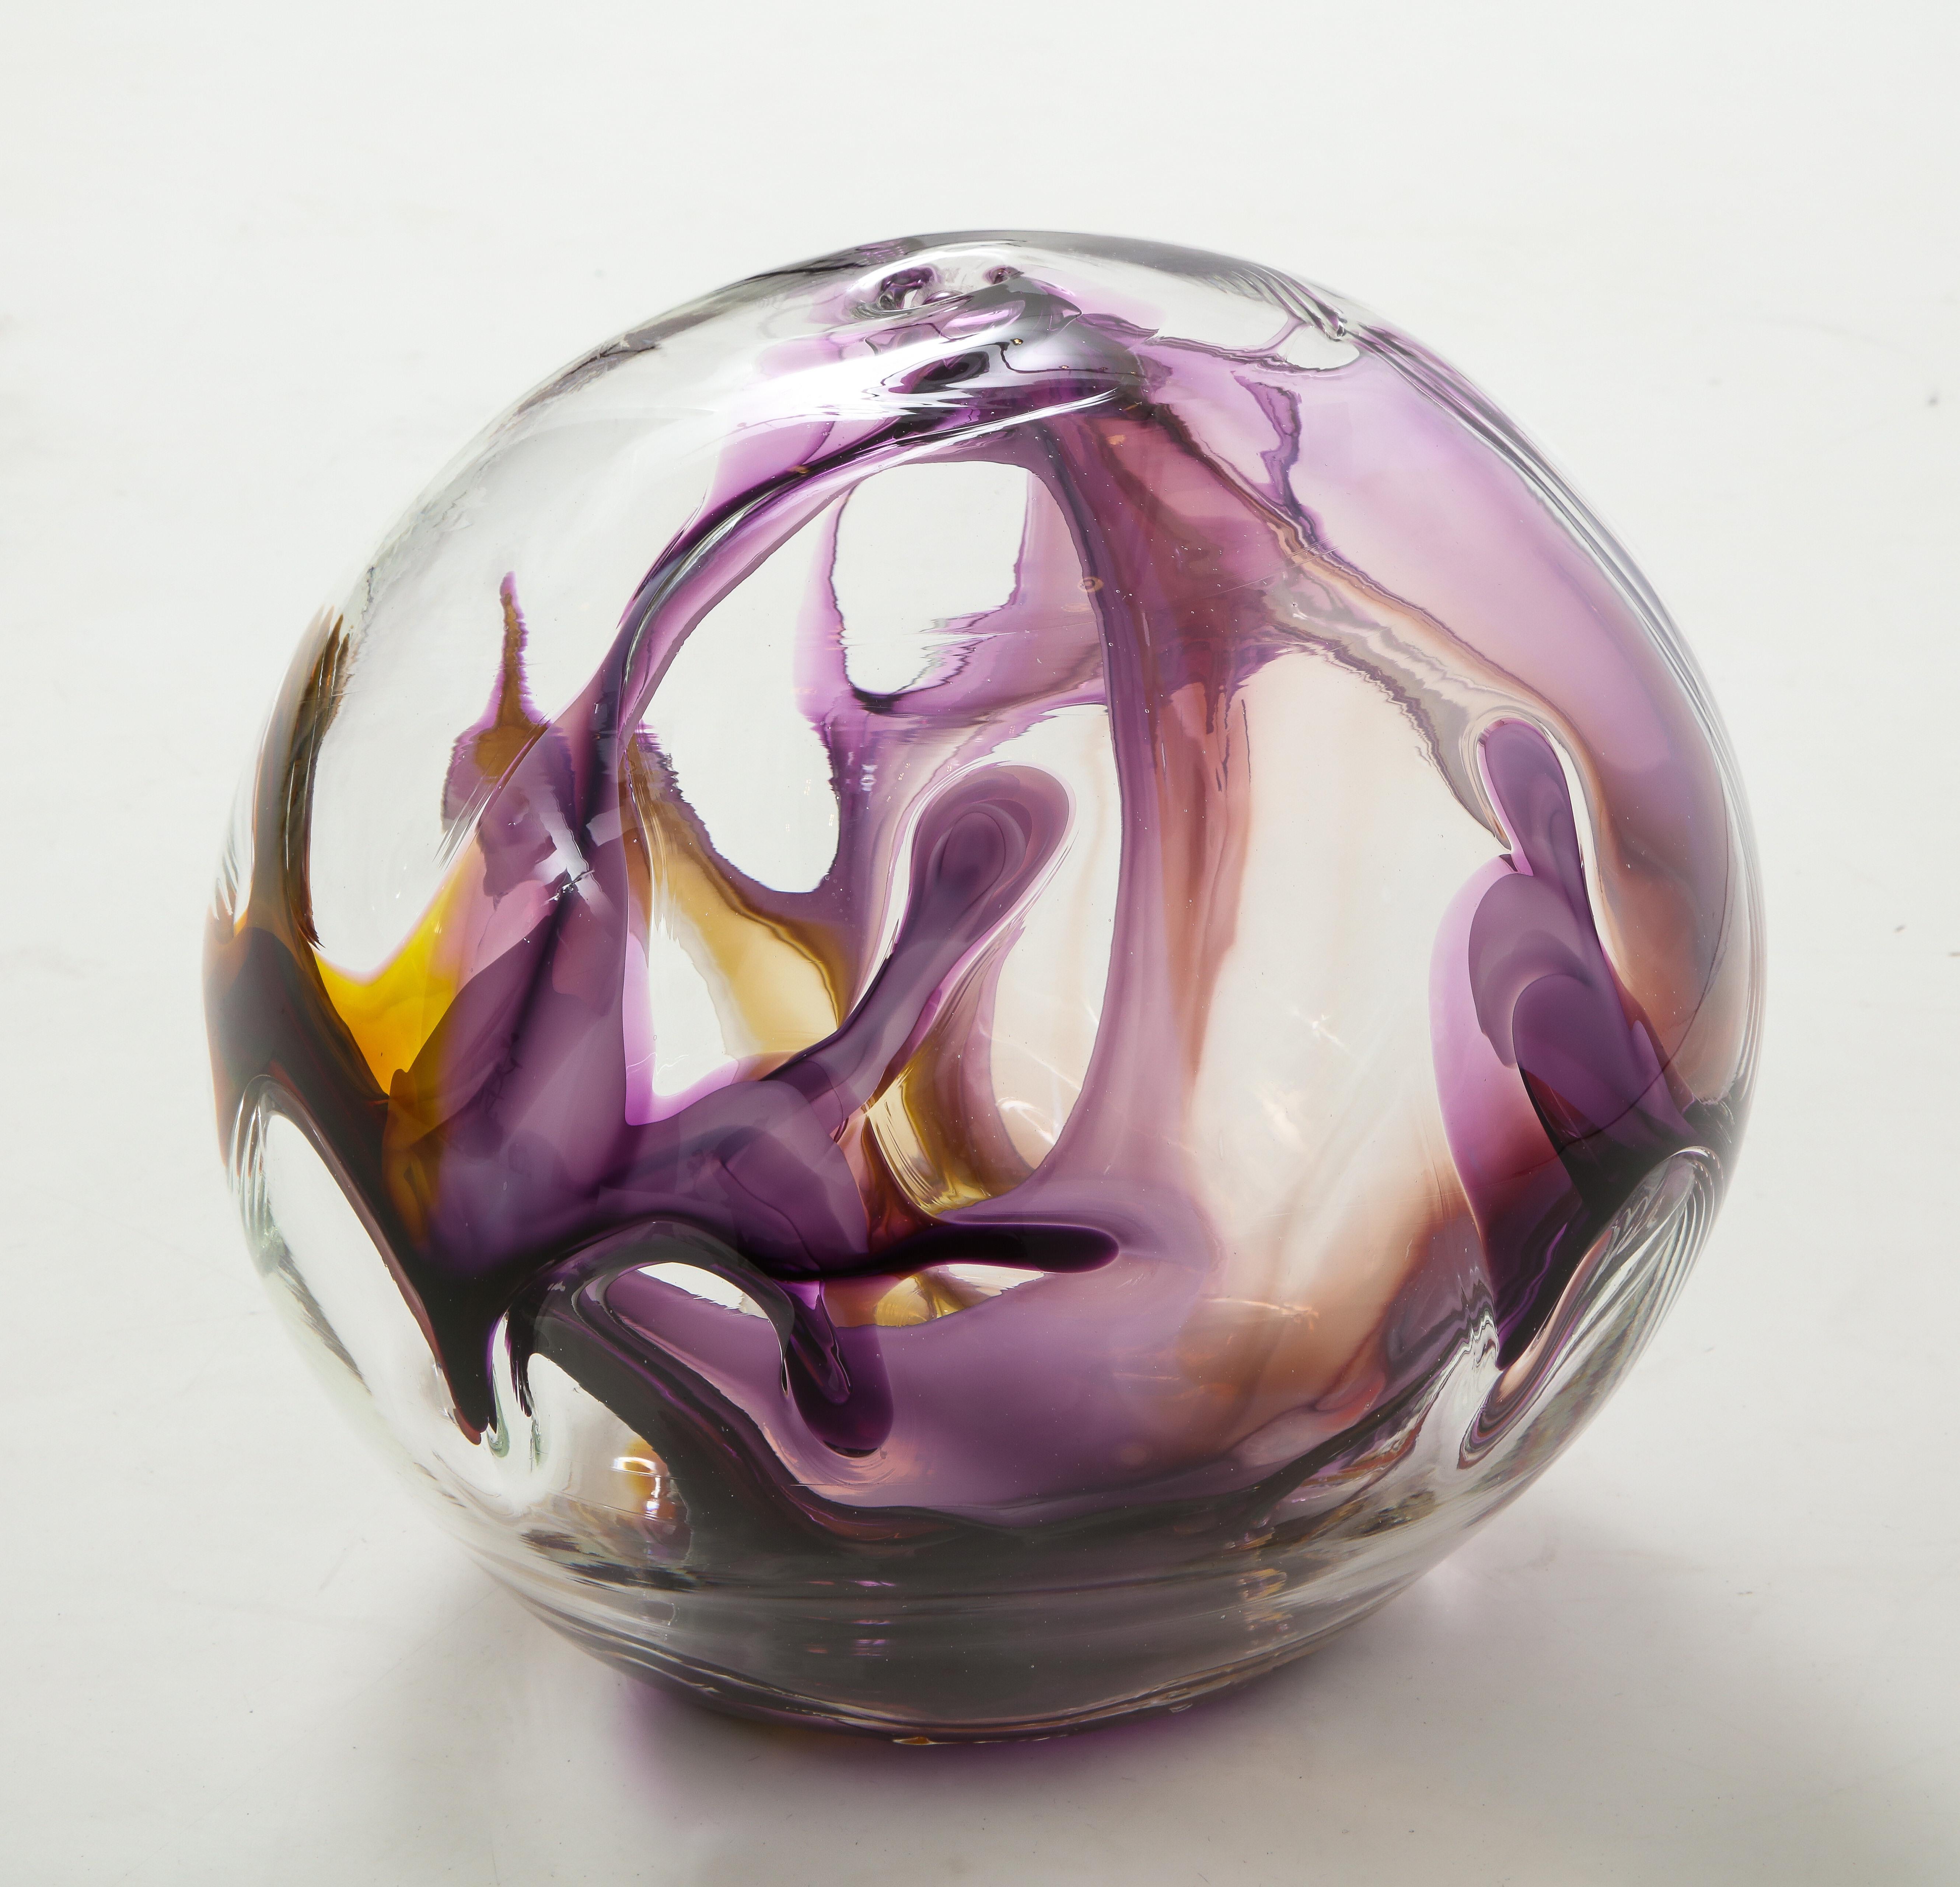 Multicolored hand blown glass sculpture with internal glass threads of
Amber, Lilac and Magenta.
Signed and dated on the bottom.